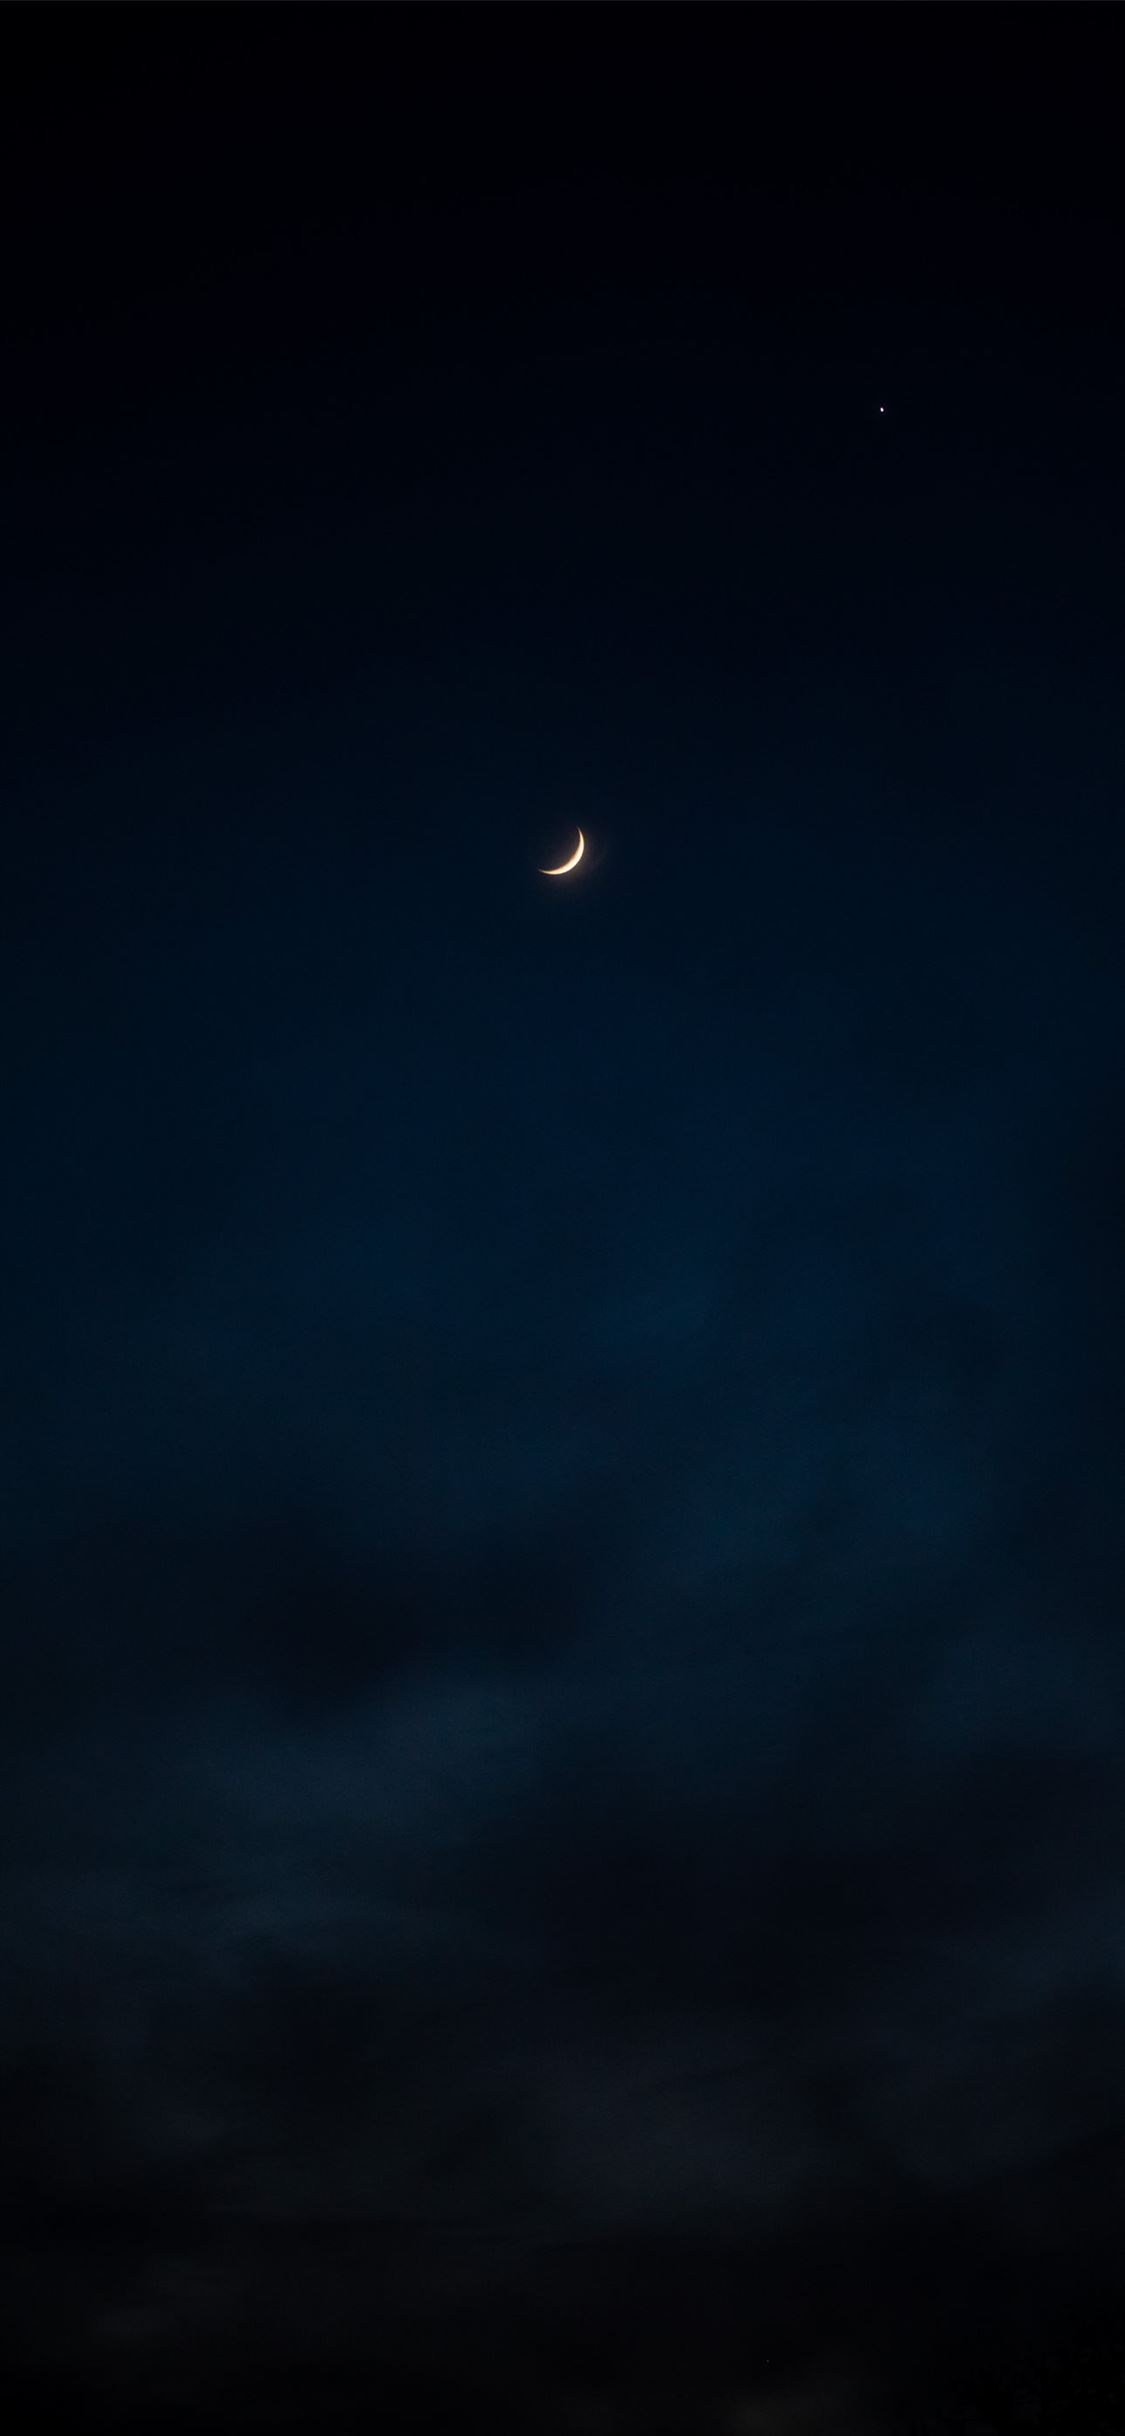 full moon in the sky iPhone wallpaper